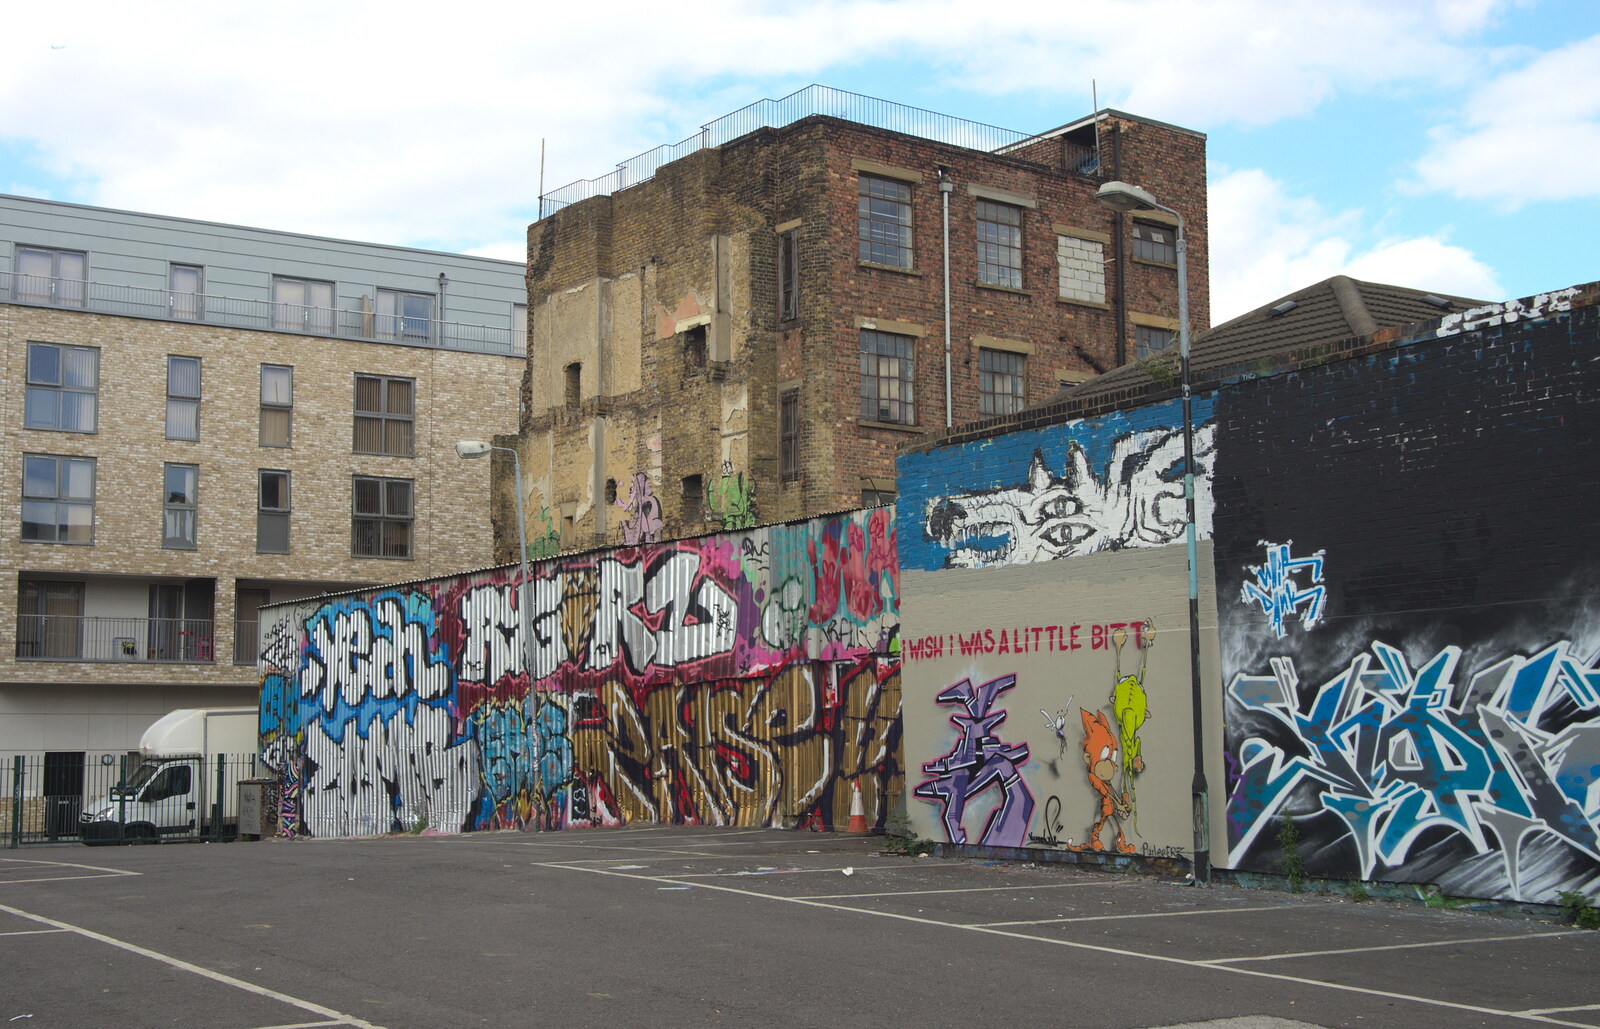 Derelict building and graffiti from Spitalfields and Brick Lane Street Art, Whitechapel, London - 10th August 2013